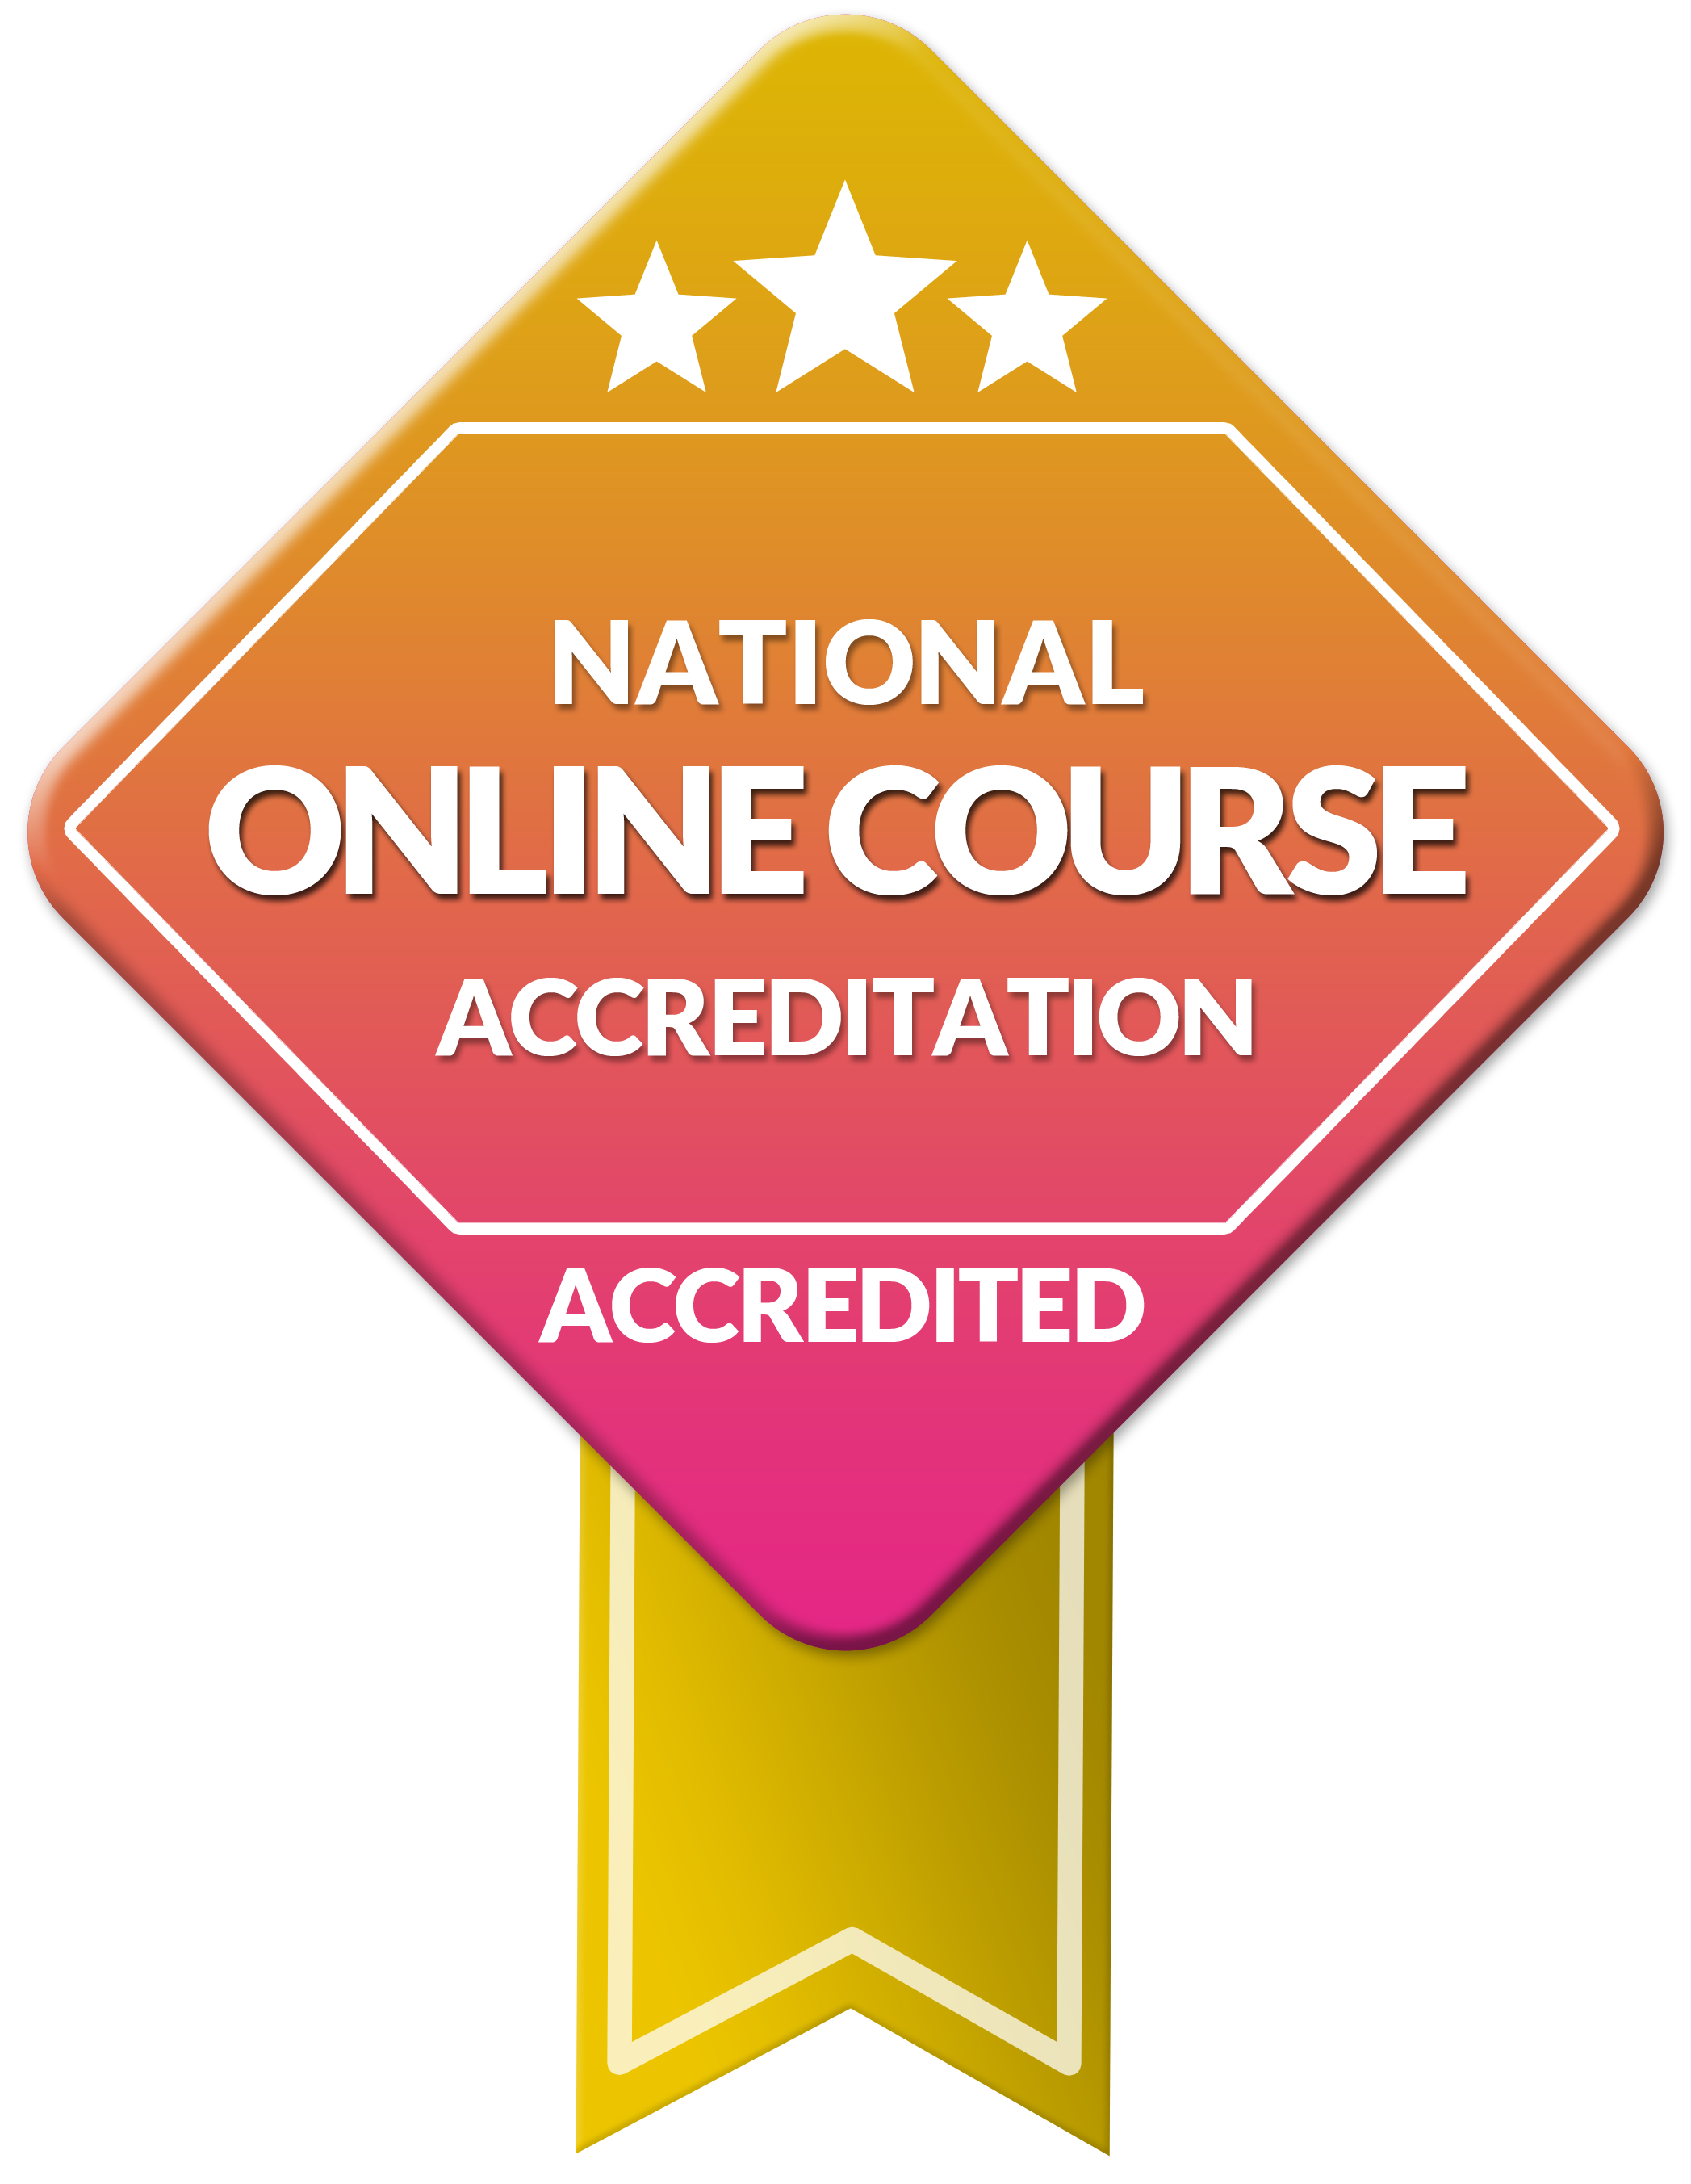 National Customer Service Course Accreditation 